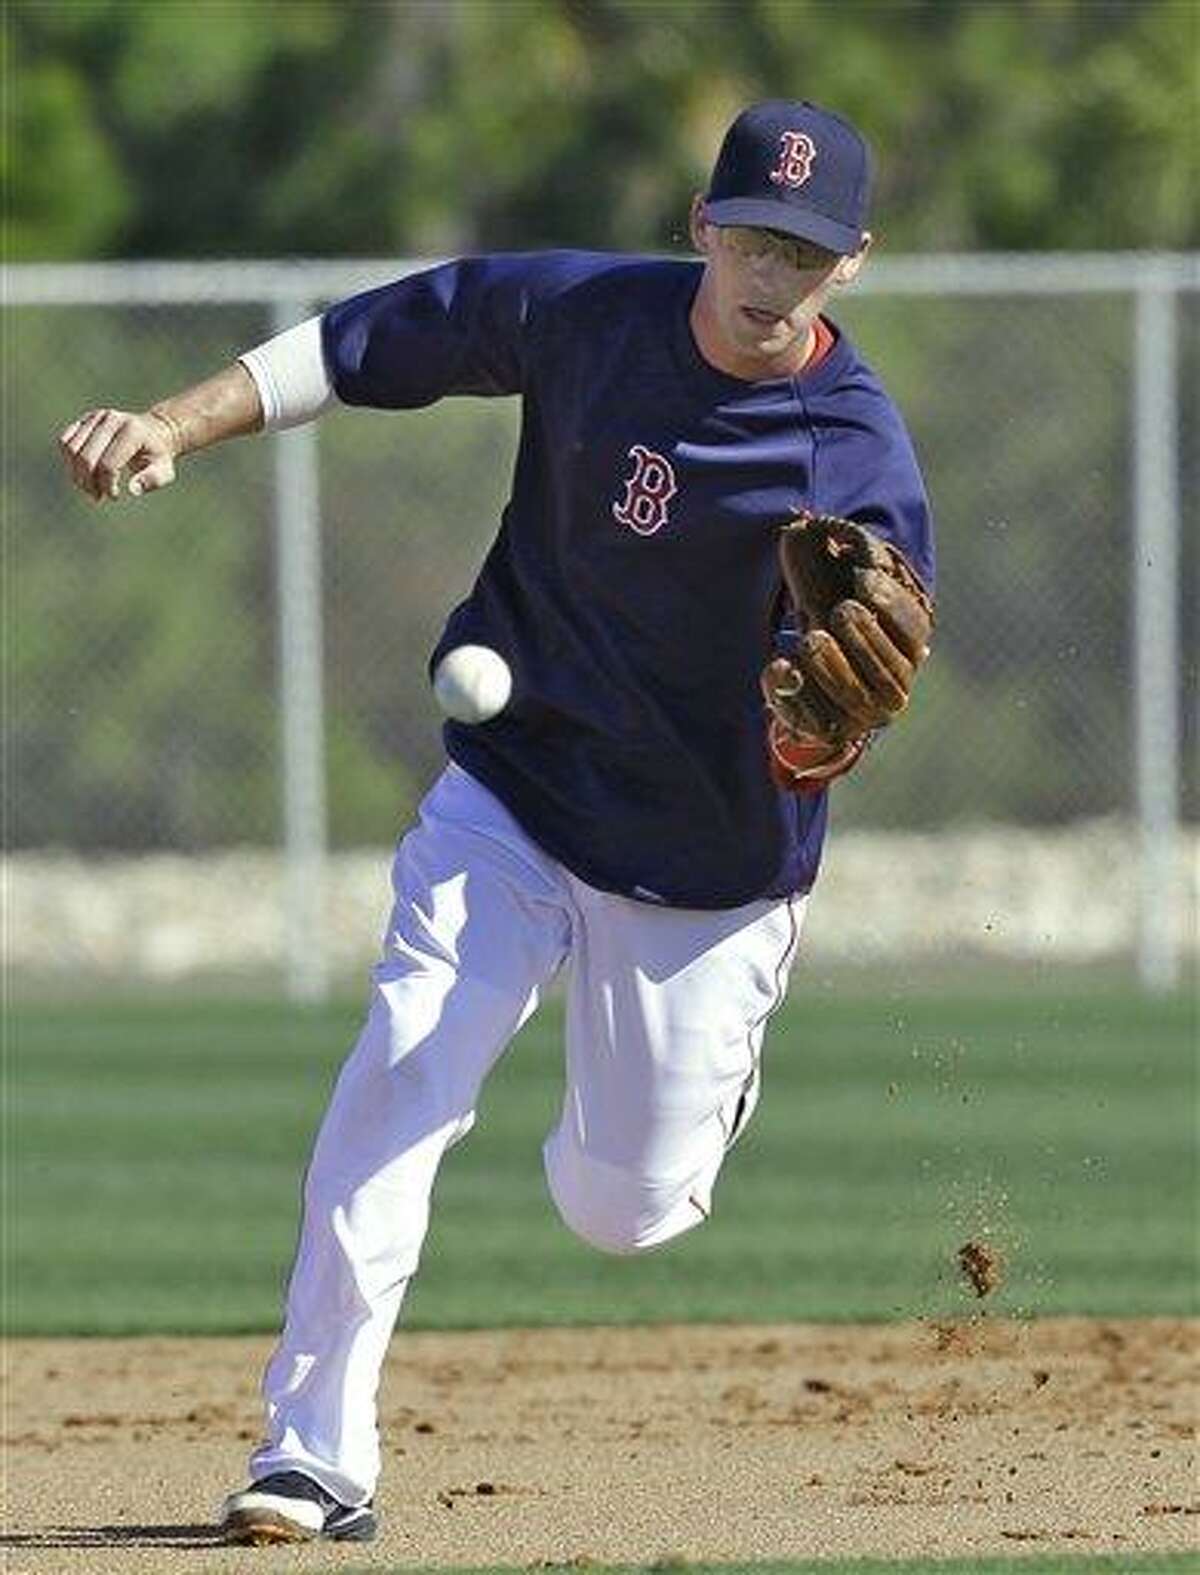 Boston Red Sox third baseman Will Middlebrooks fields a ground ball during a spring training workout Sunday, Feb. 17, 2013, in Fort Myers, Fla. (AP Photo/Chris O'Meara)